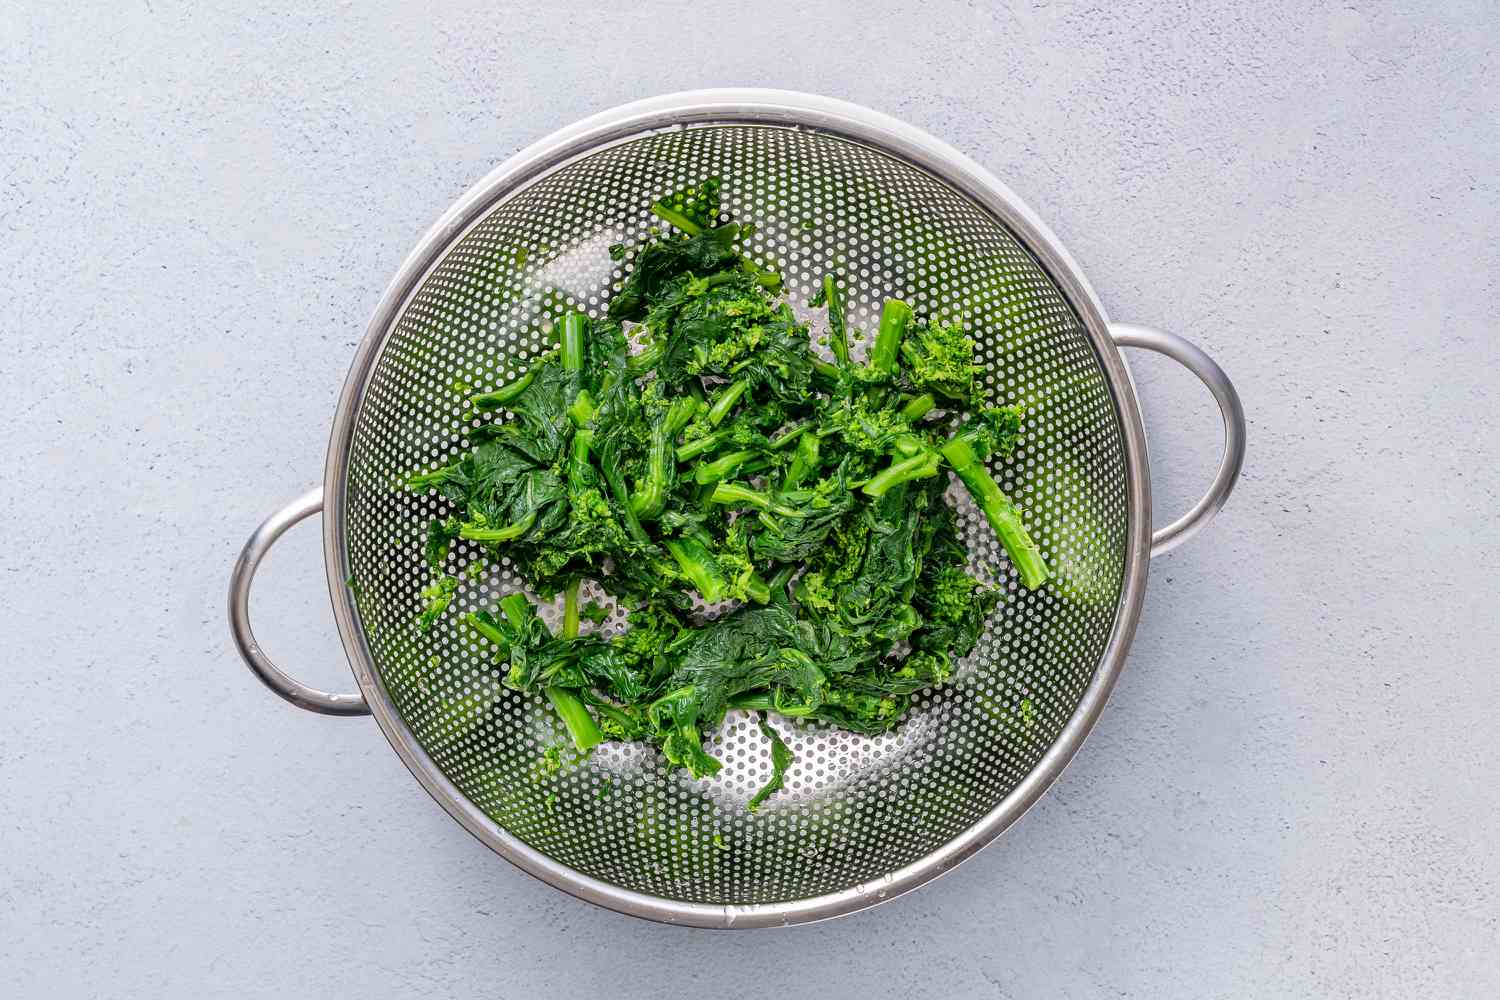 Cooked broccoli rabe in a colander